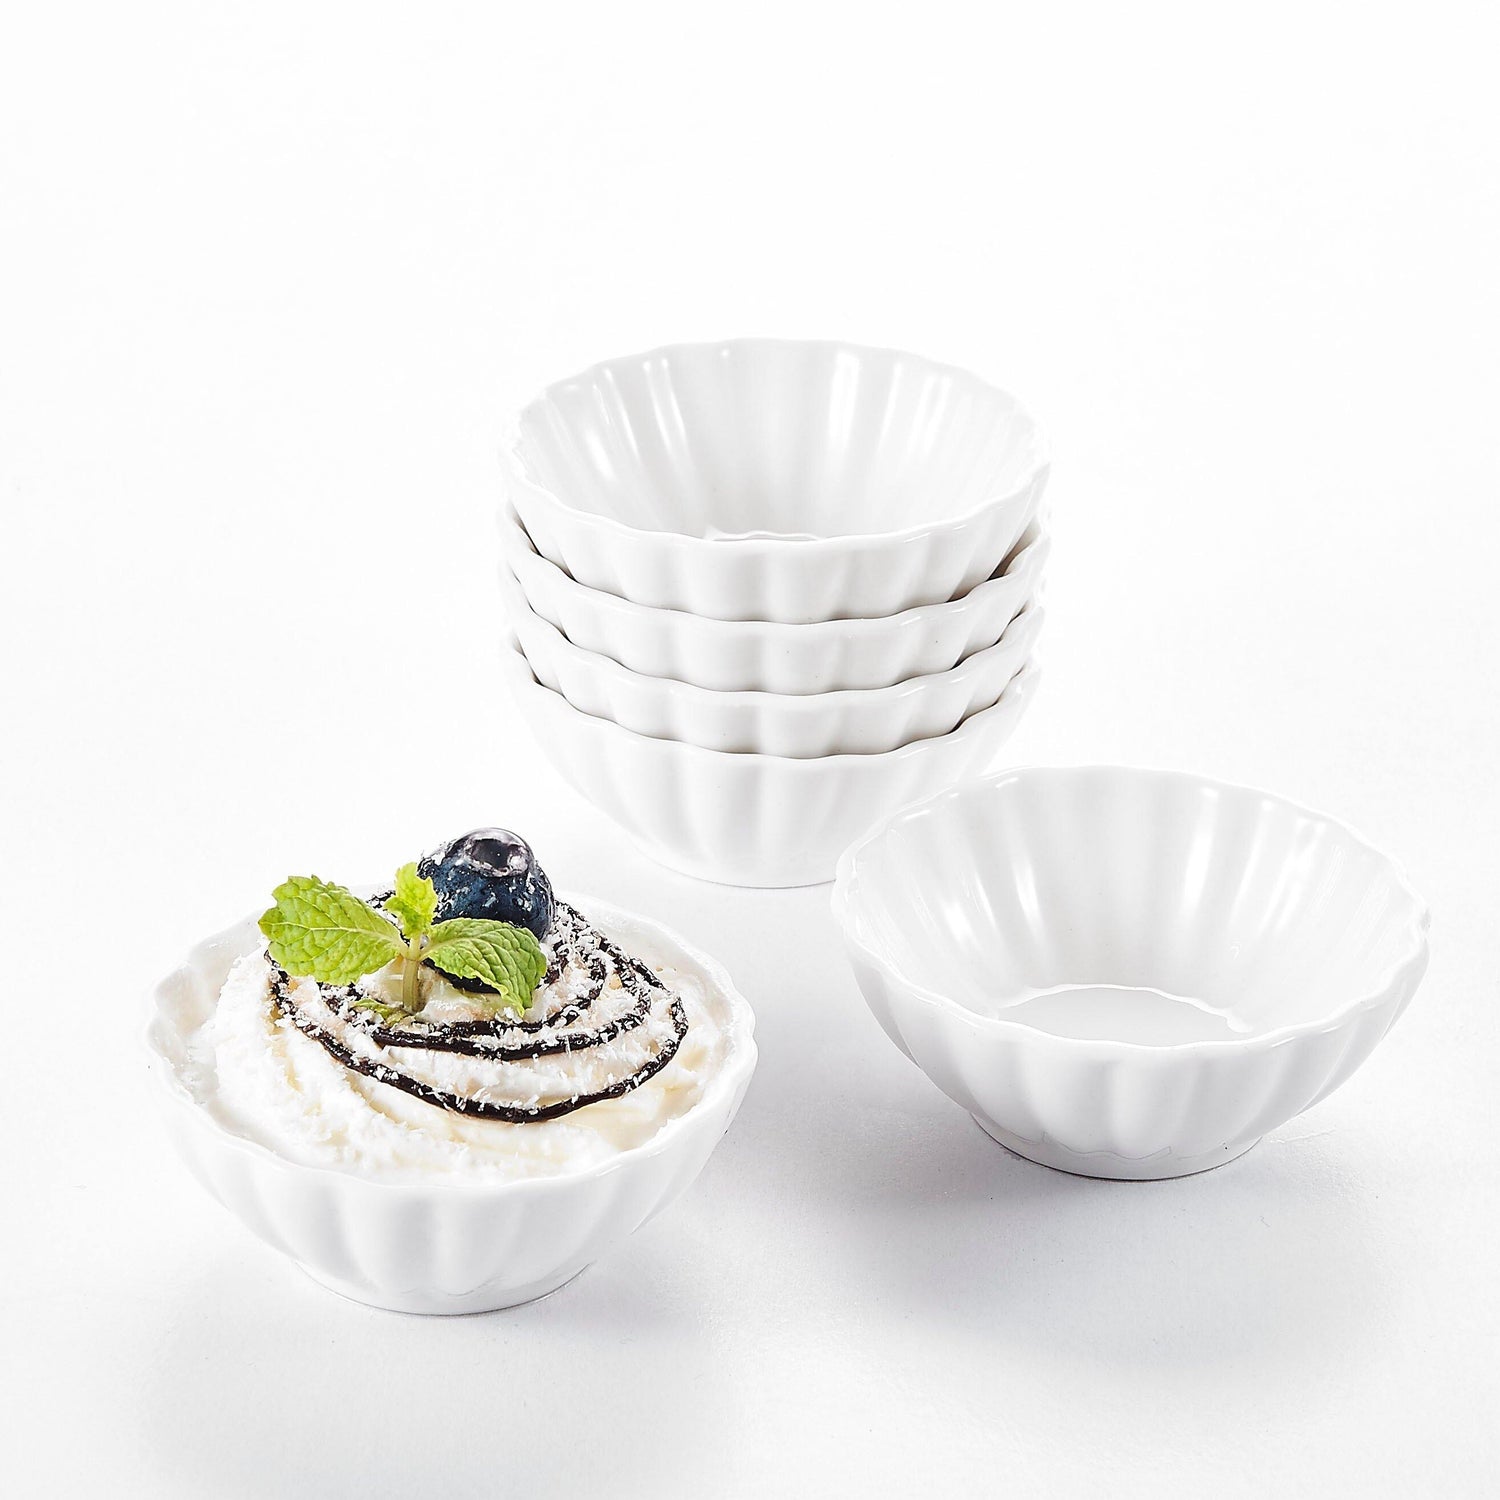 12-Piece 3" Ivory White Porcelain Ceramic Ramekins/Dipping Bowl - Nordic Side - 12, Bowl, Ceramic, Condiment, Cream, Dessert, Dipping, Dish, Dishes, for, MALACASA, Ngredients, Piece, Porcelai